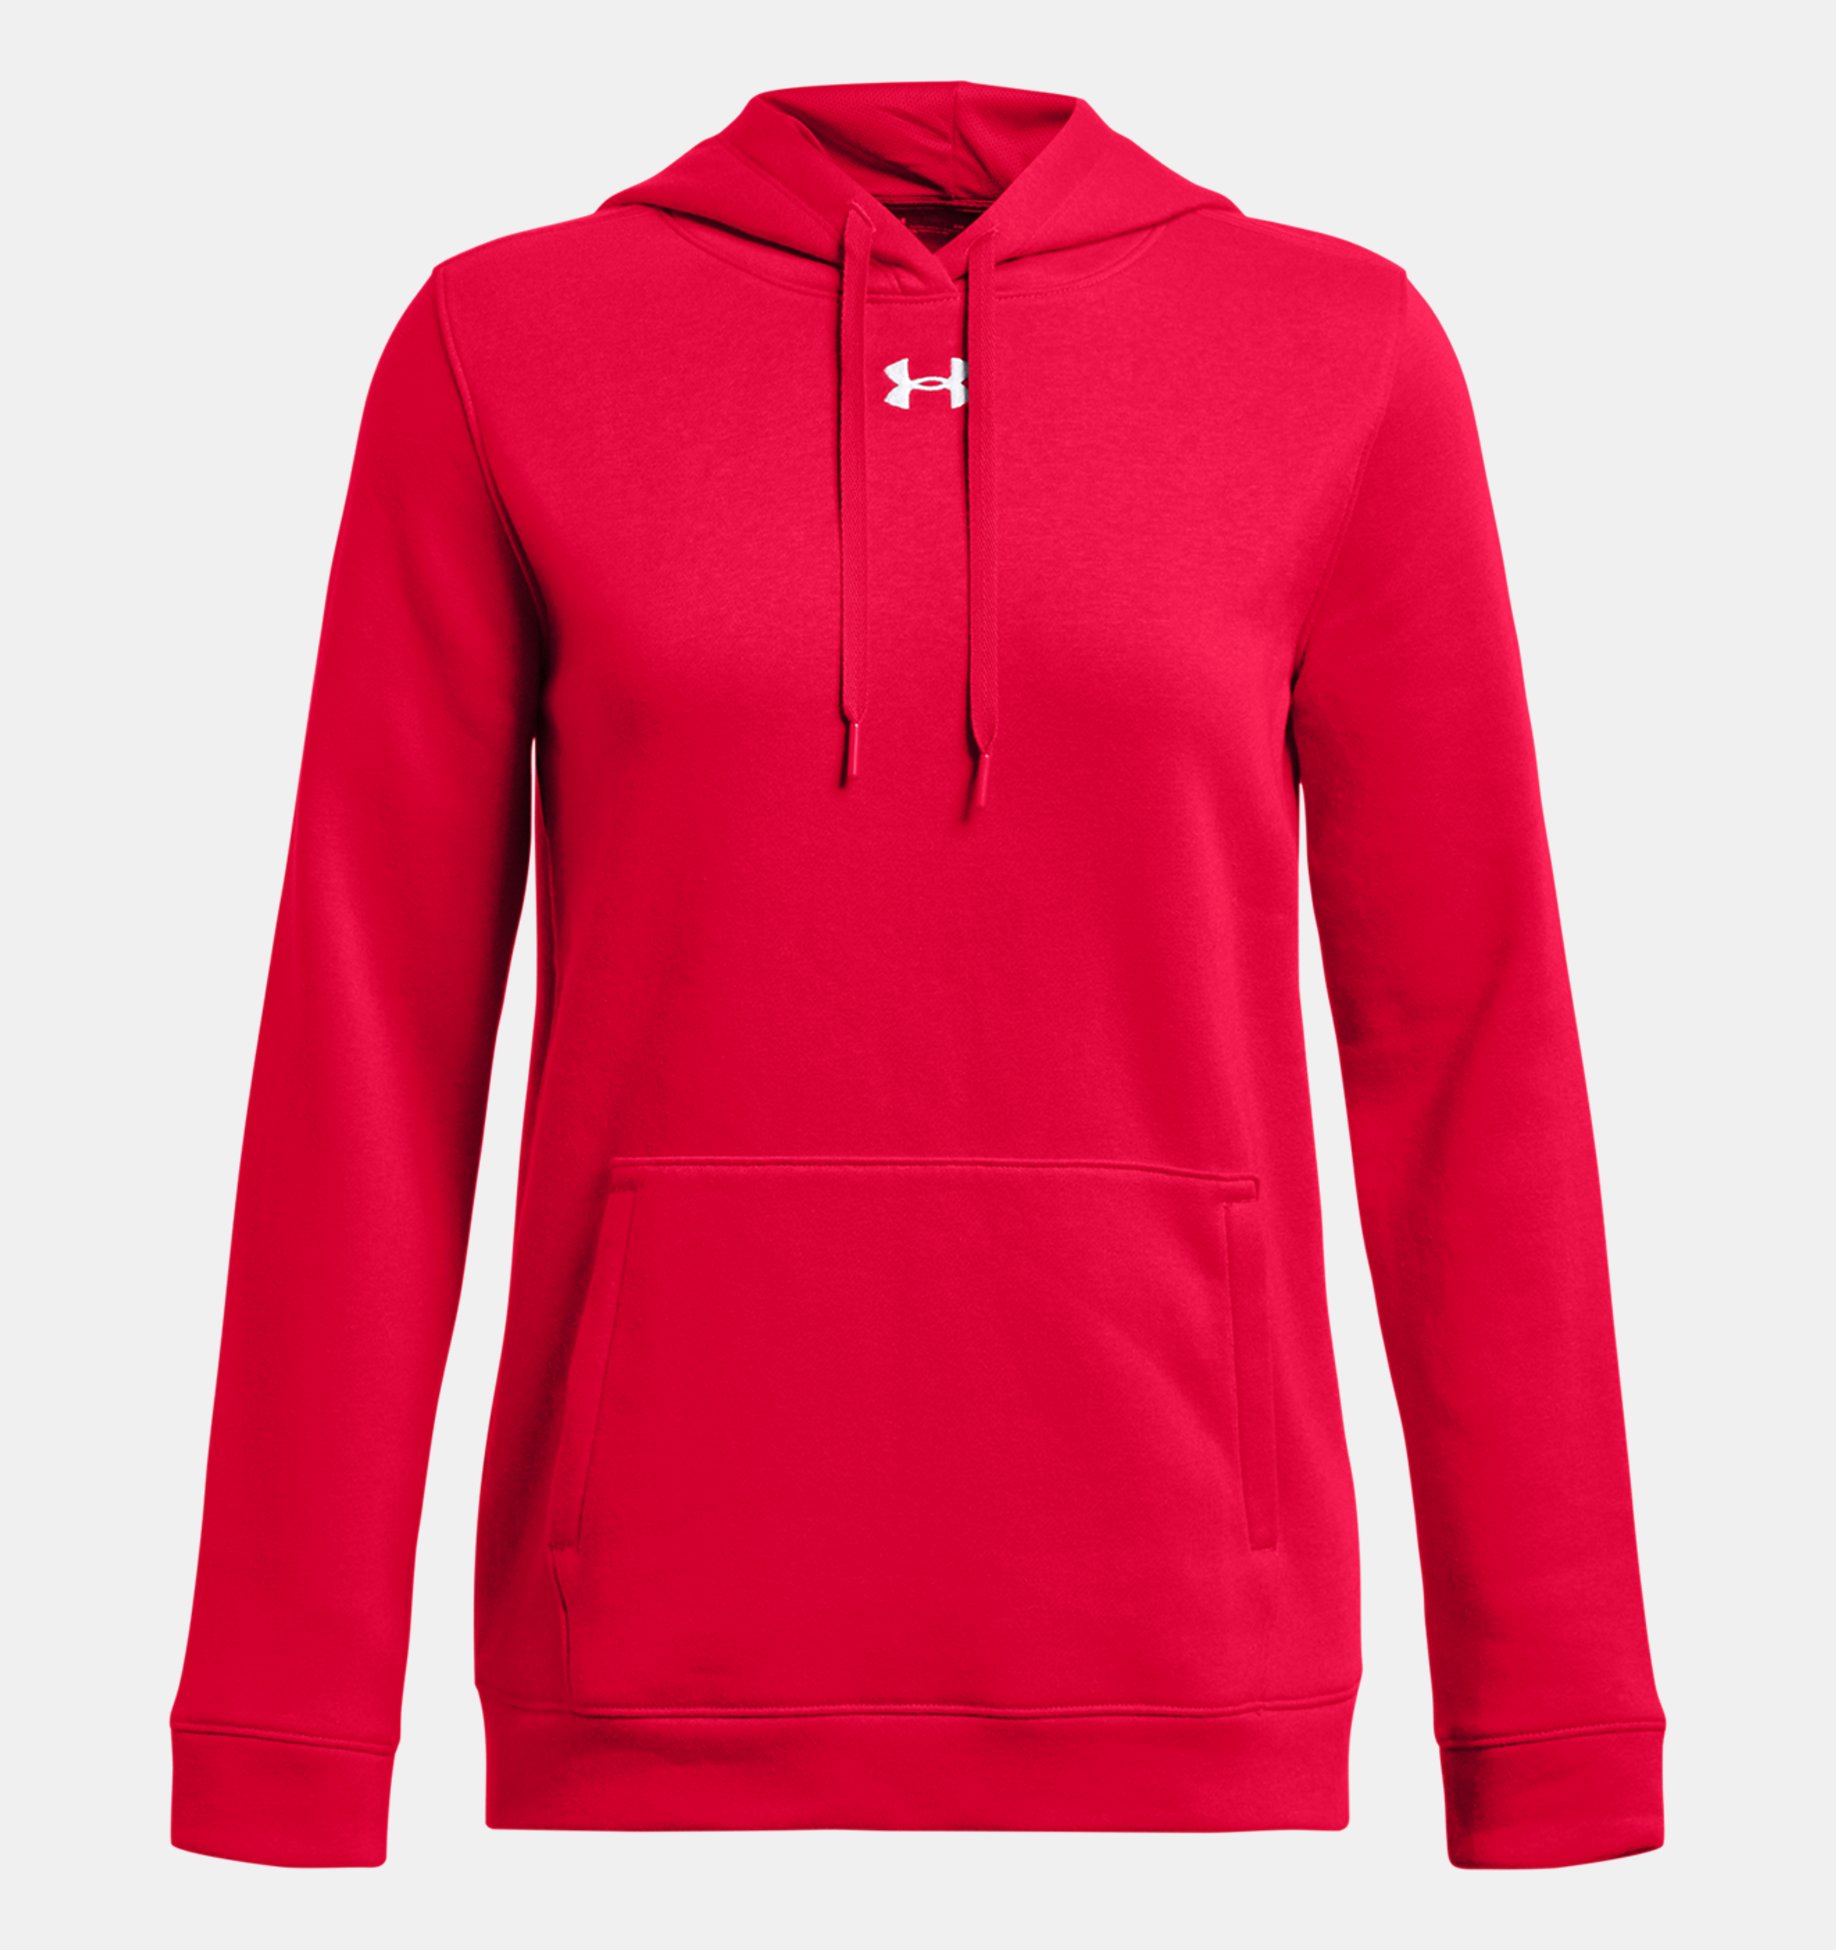 Kids Under Armour Red Size 5 Pullover Hoodie 